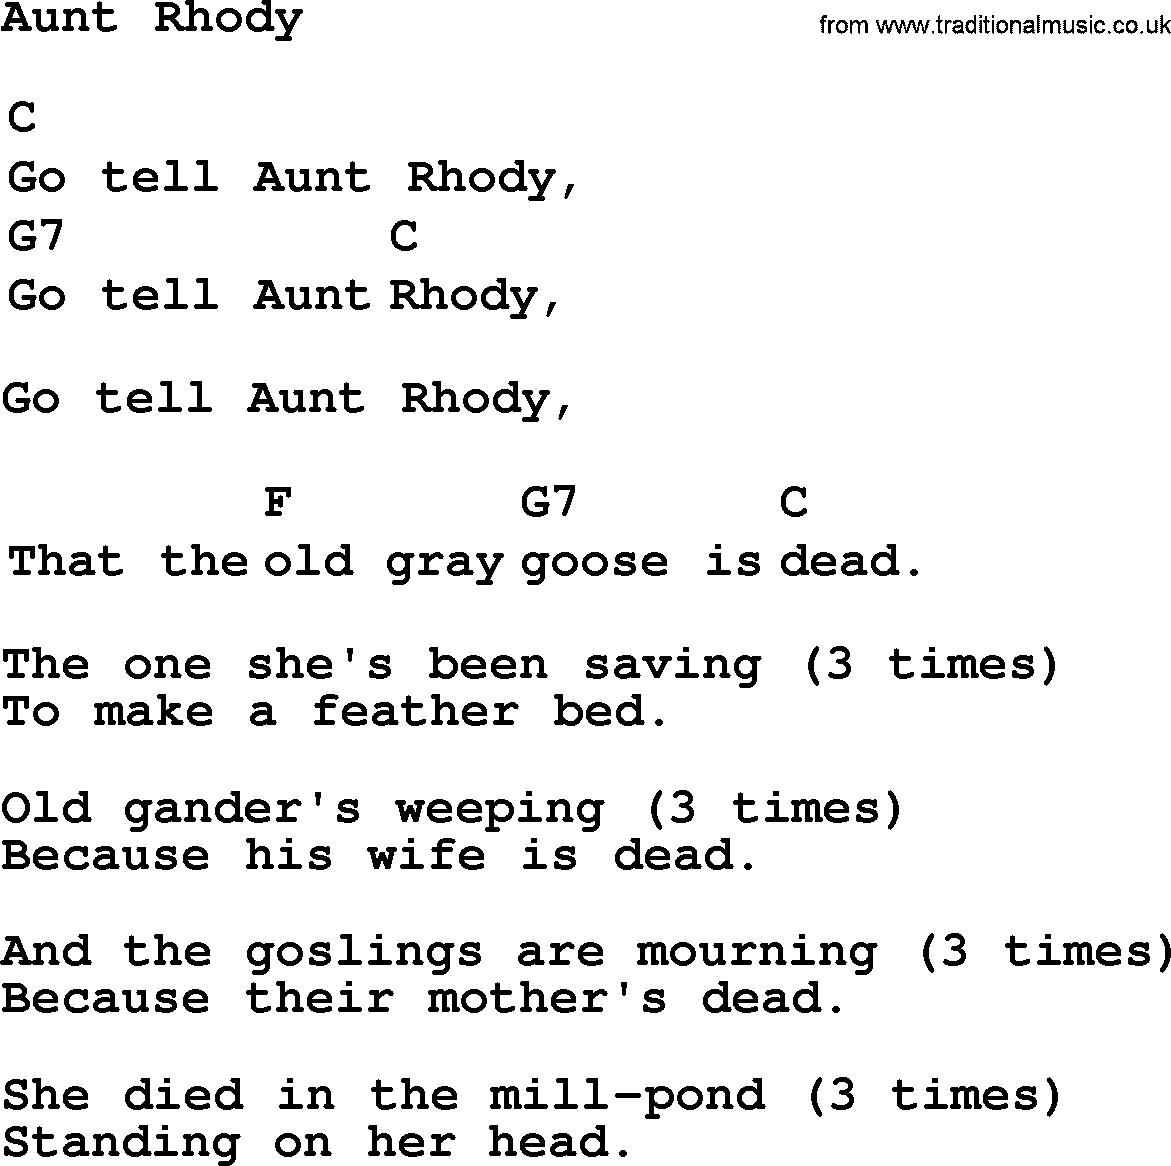 Top 1000 Most Popular Folk and Old-time Songs: Aunt Rhody, lyrics and chords